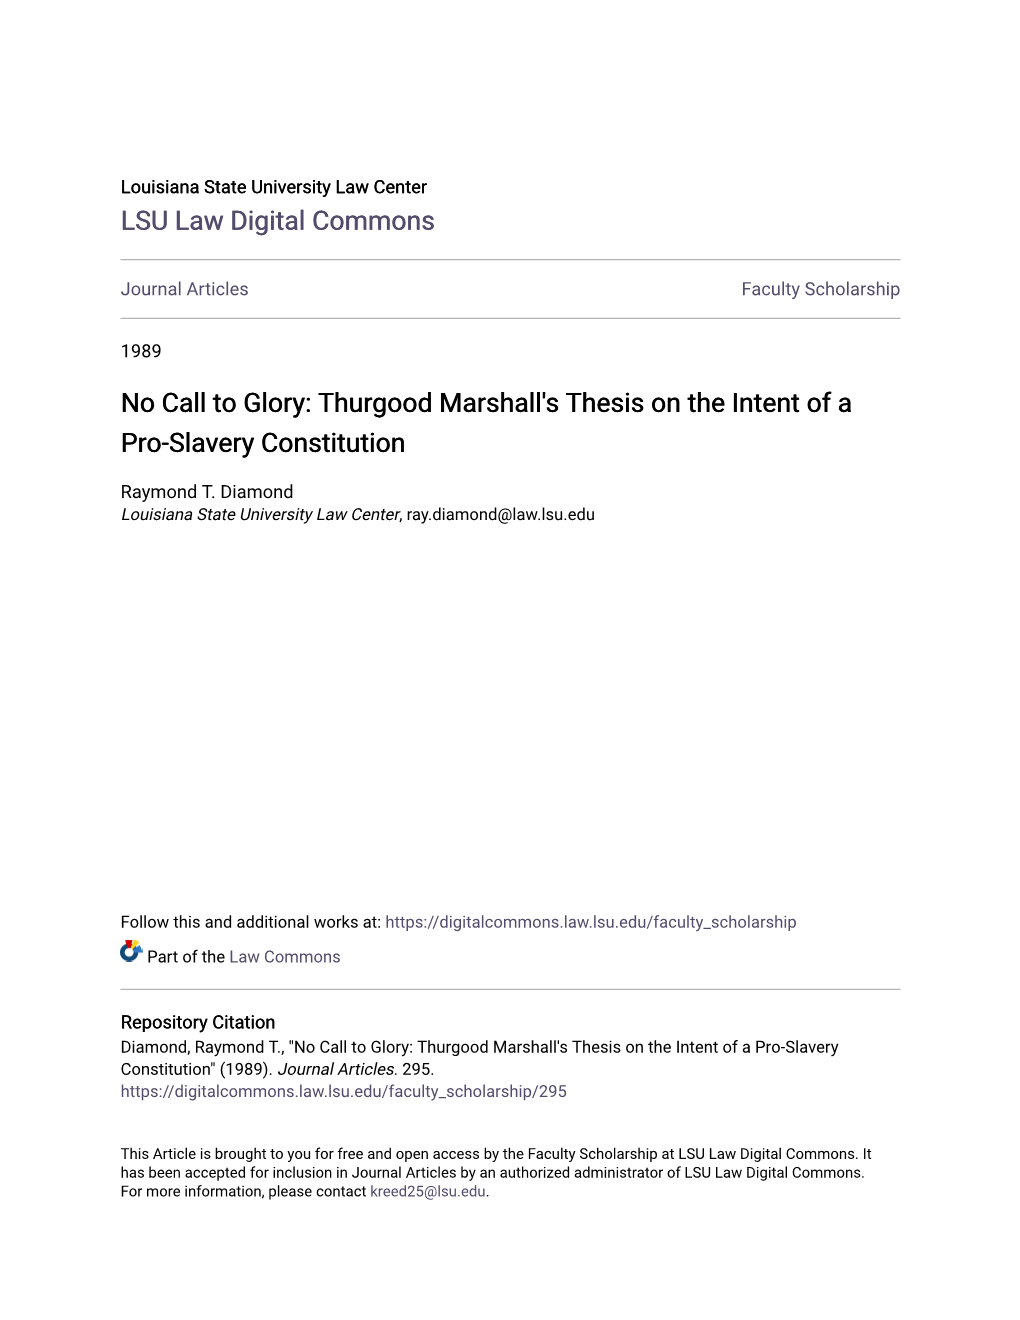 No Call to Glory: Thurgood Marshall's Thesis on the Intent of a Pro-Slavery Constitution